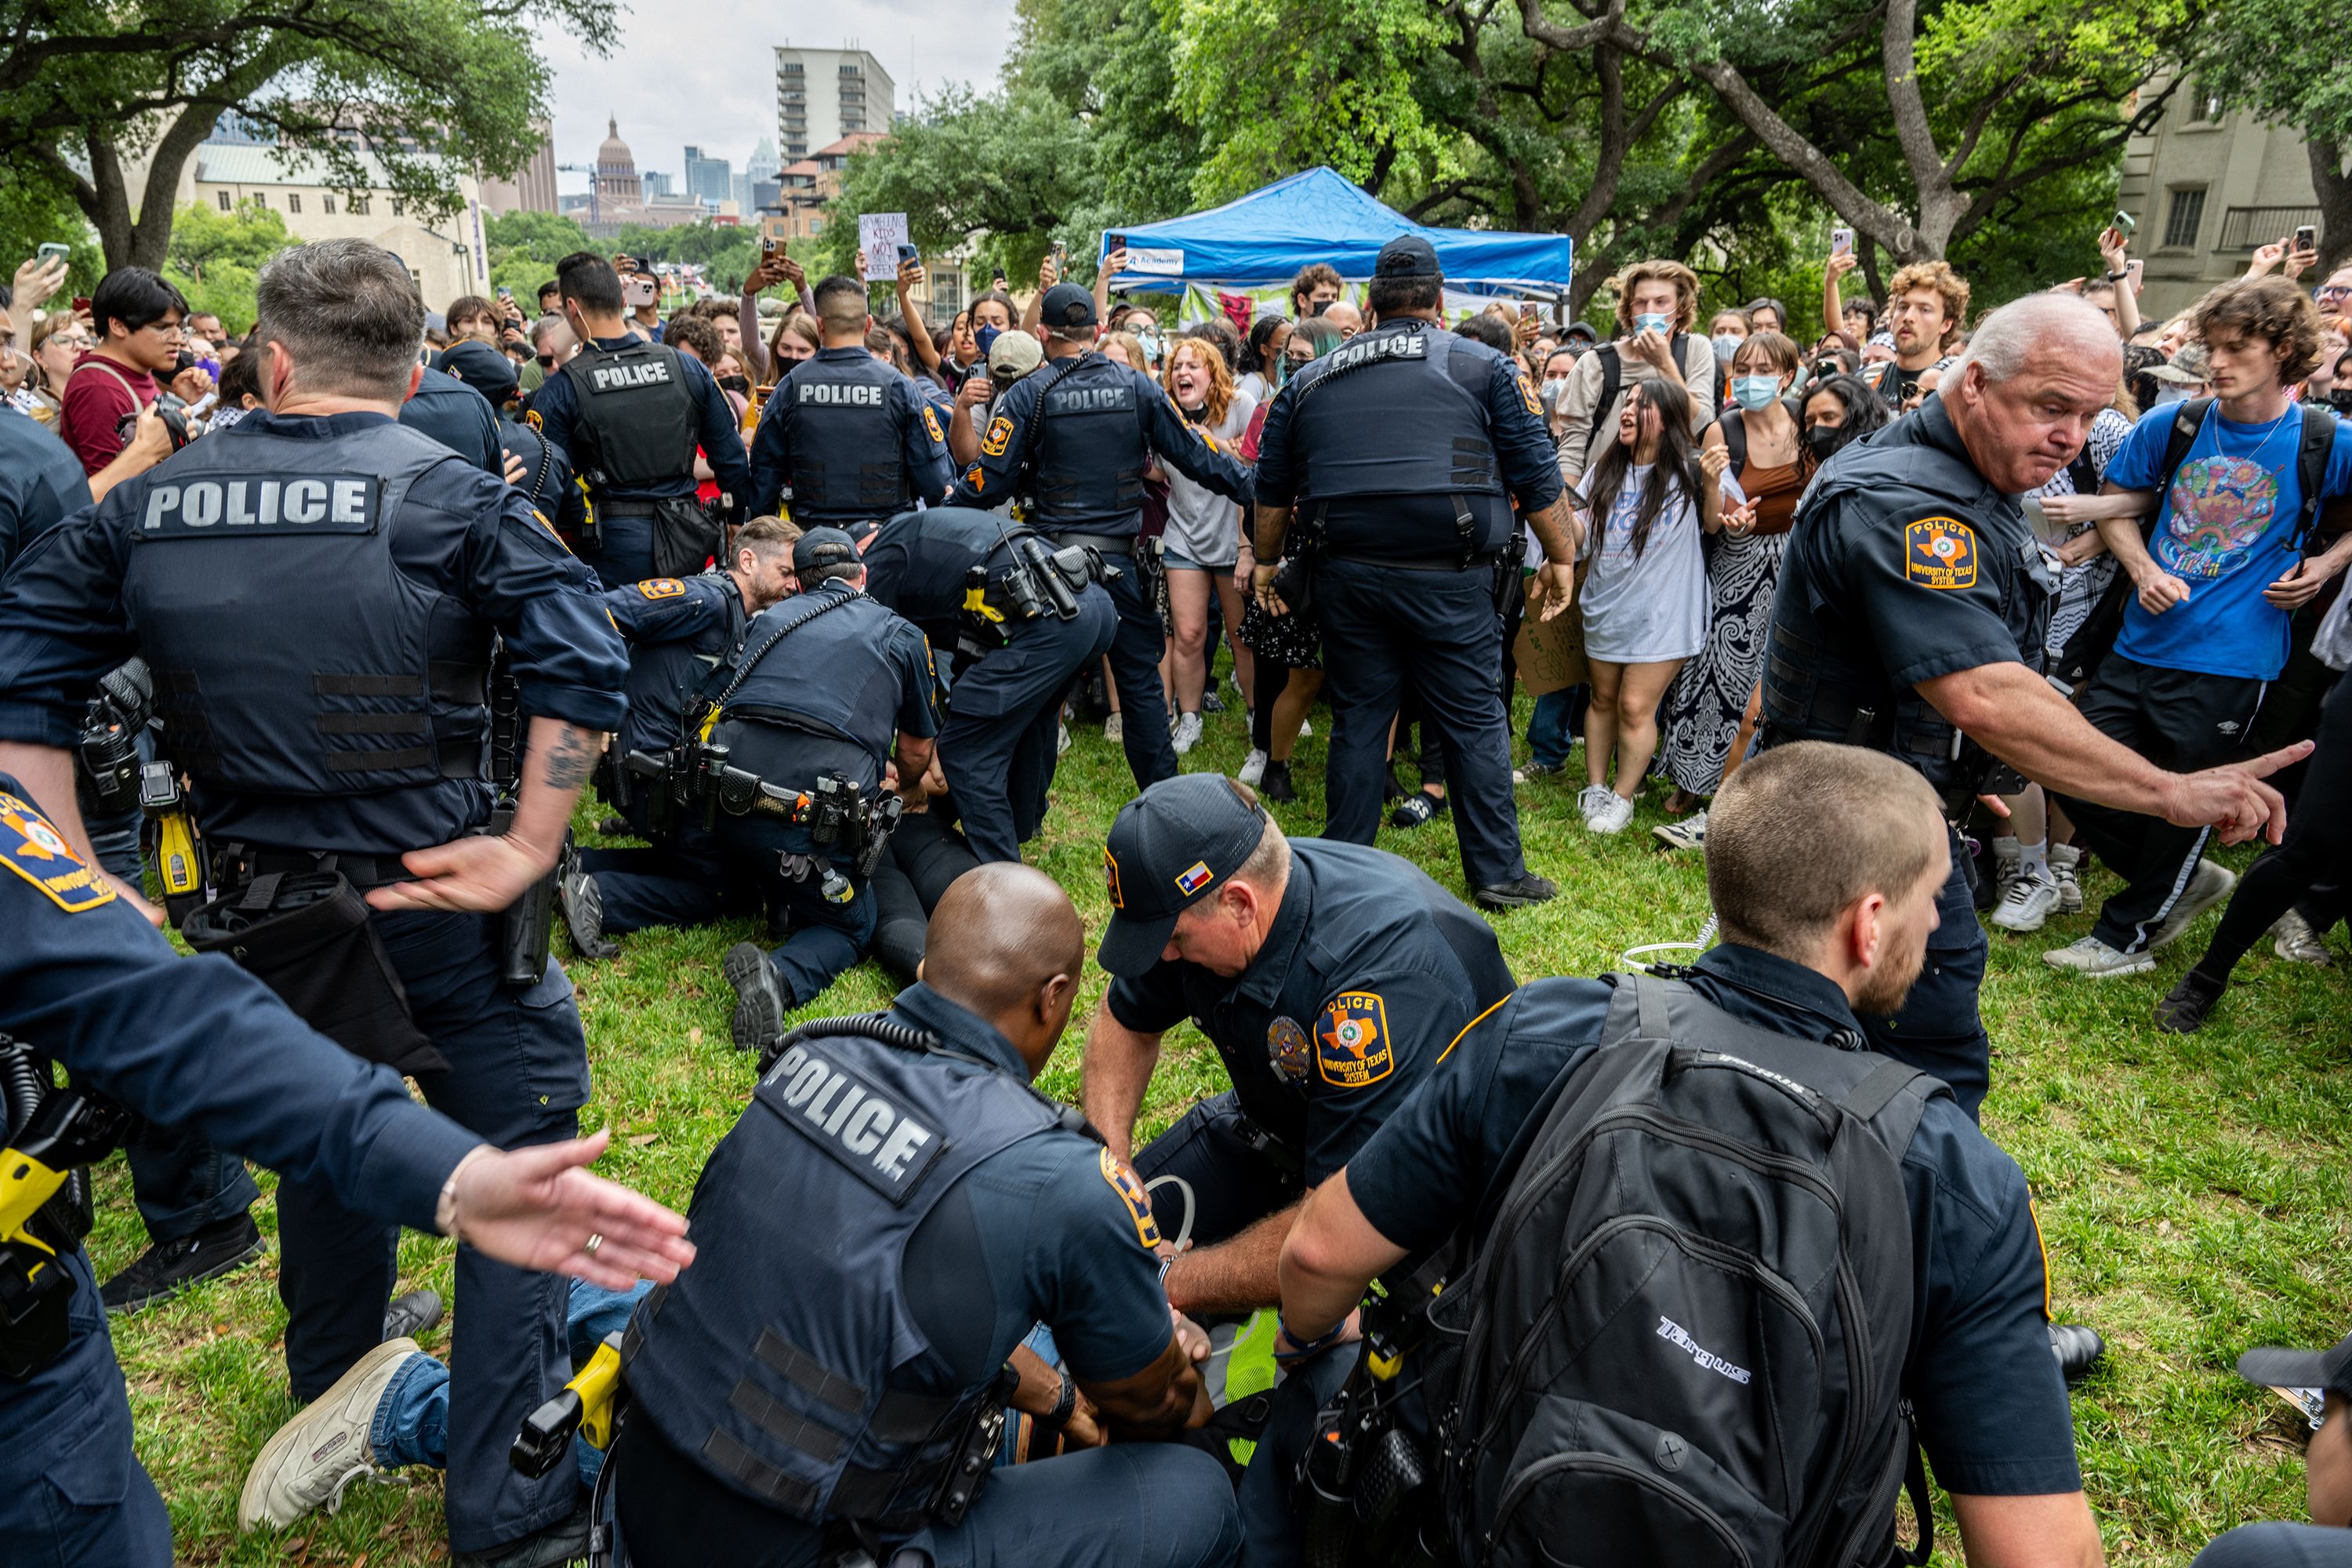 Students are arrested during the protest in Austin on April 24. <a href="https://www.cnn.com/business/live-news/columbia-usc-university-protests-04-25-24/h_fe6a015b9b48e0c63141f63de83c9726" target="_blank">There were dozens of arrests</a>. University police had warned students in an email that they faced more arrests if they didn't disperse from the site.